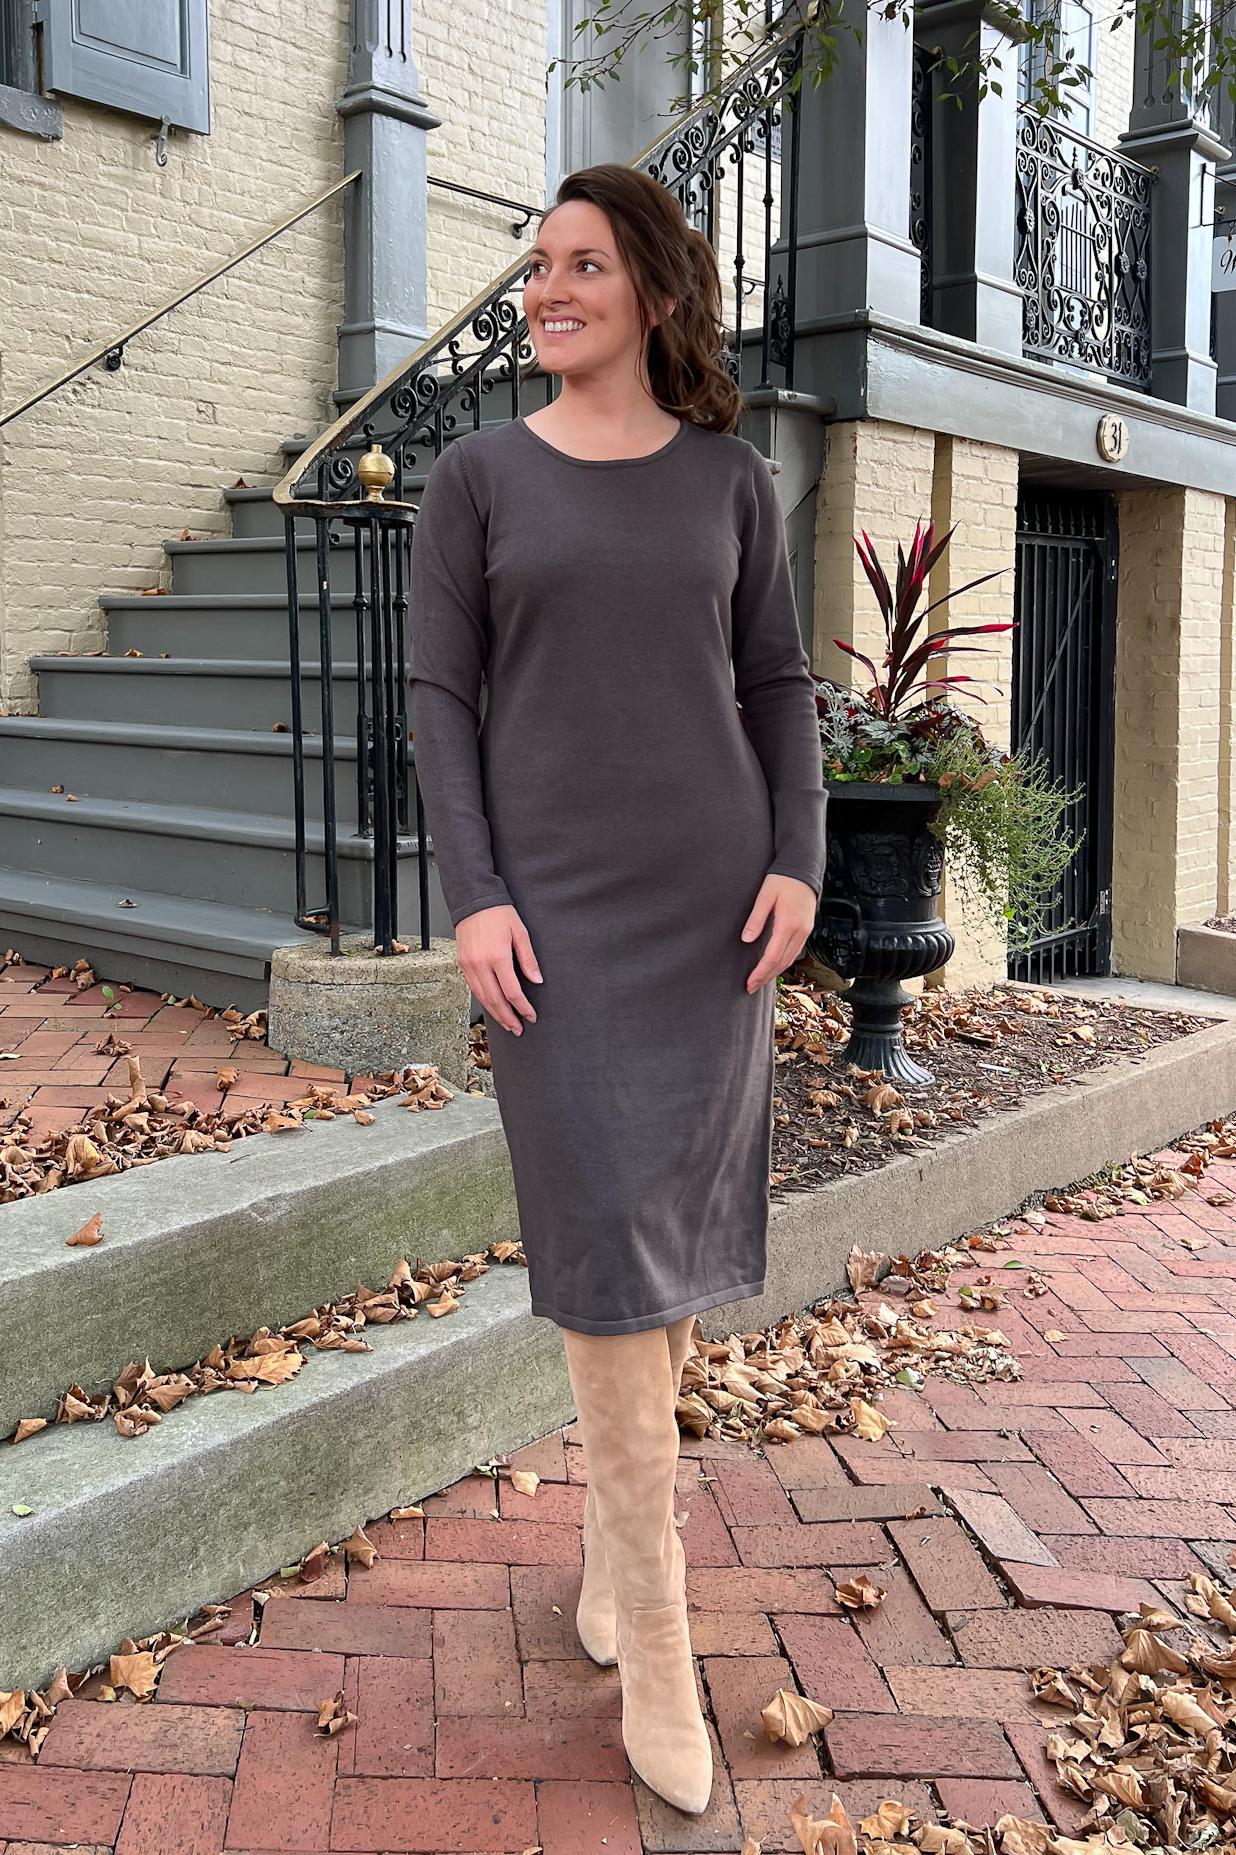 THE QUINN EVERYDAY SCOOP NECK SWEATER DRESS IN GREY